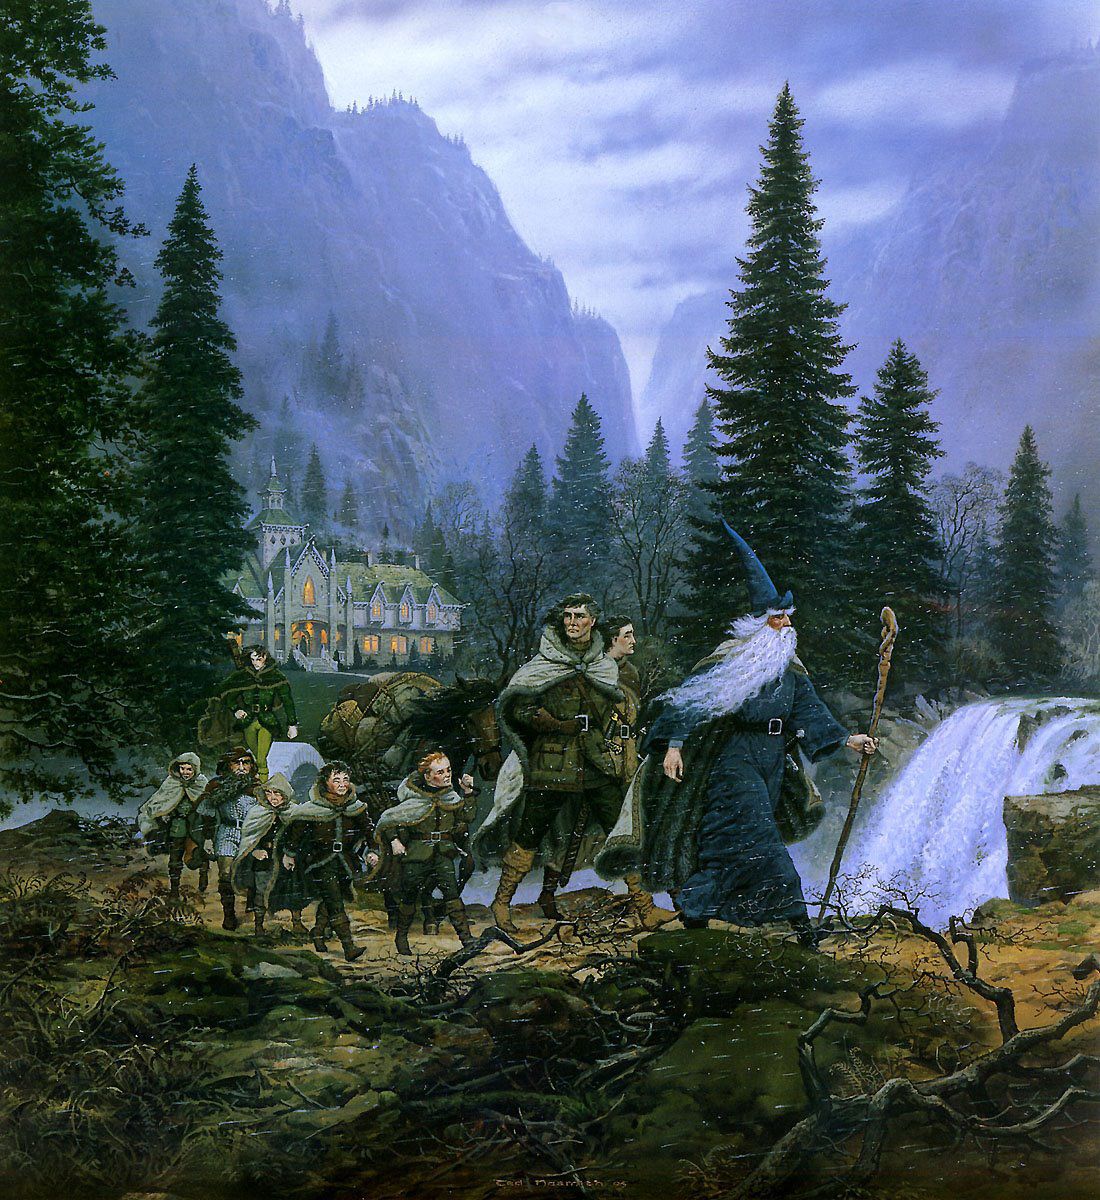 The Fellowship Leaving Rivendell by Ted Nasmith